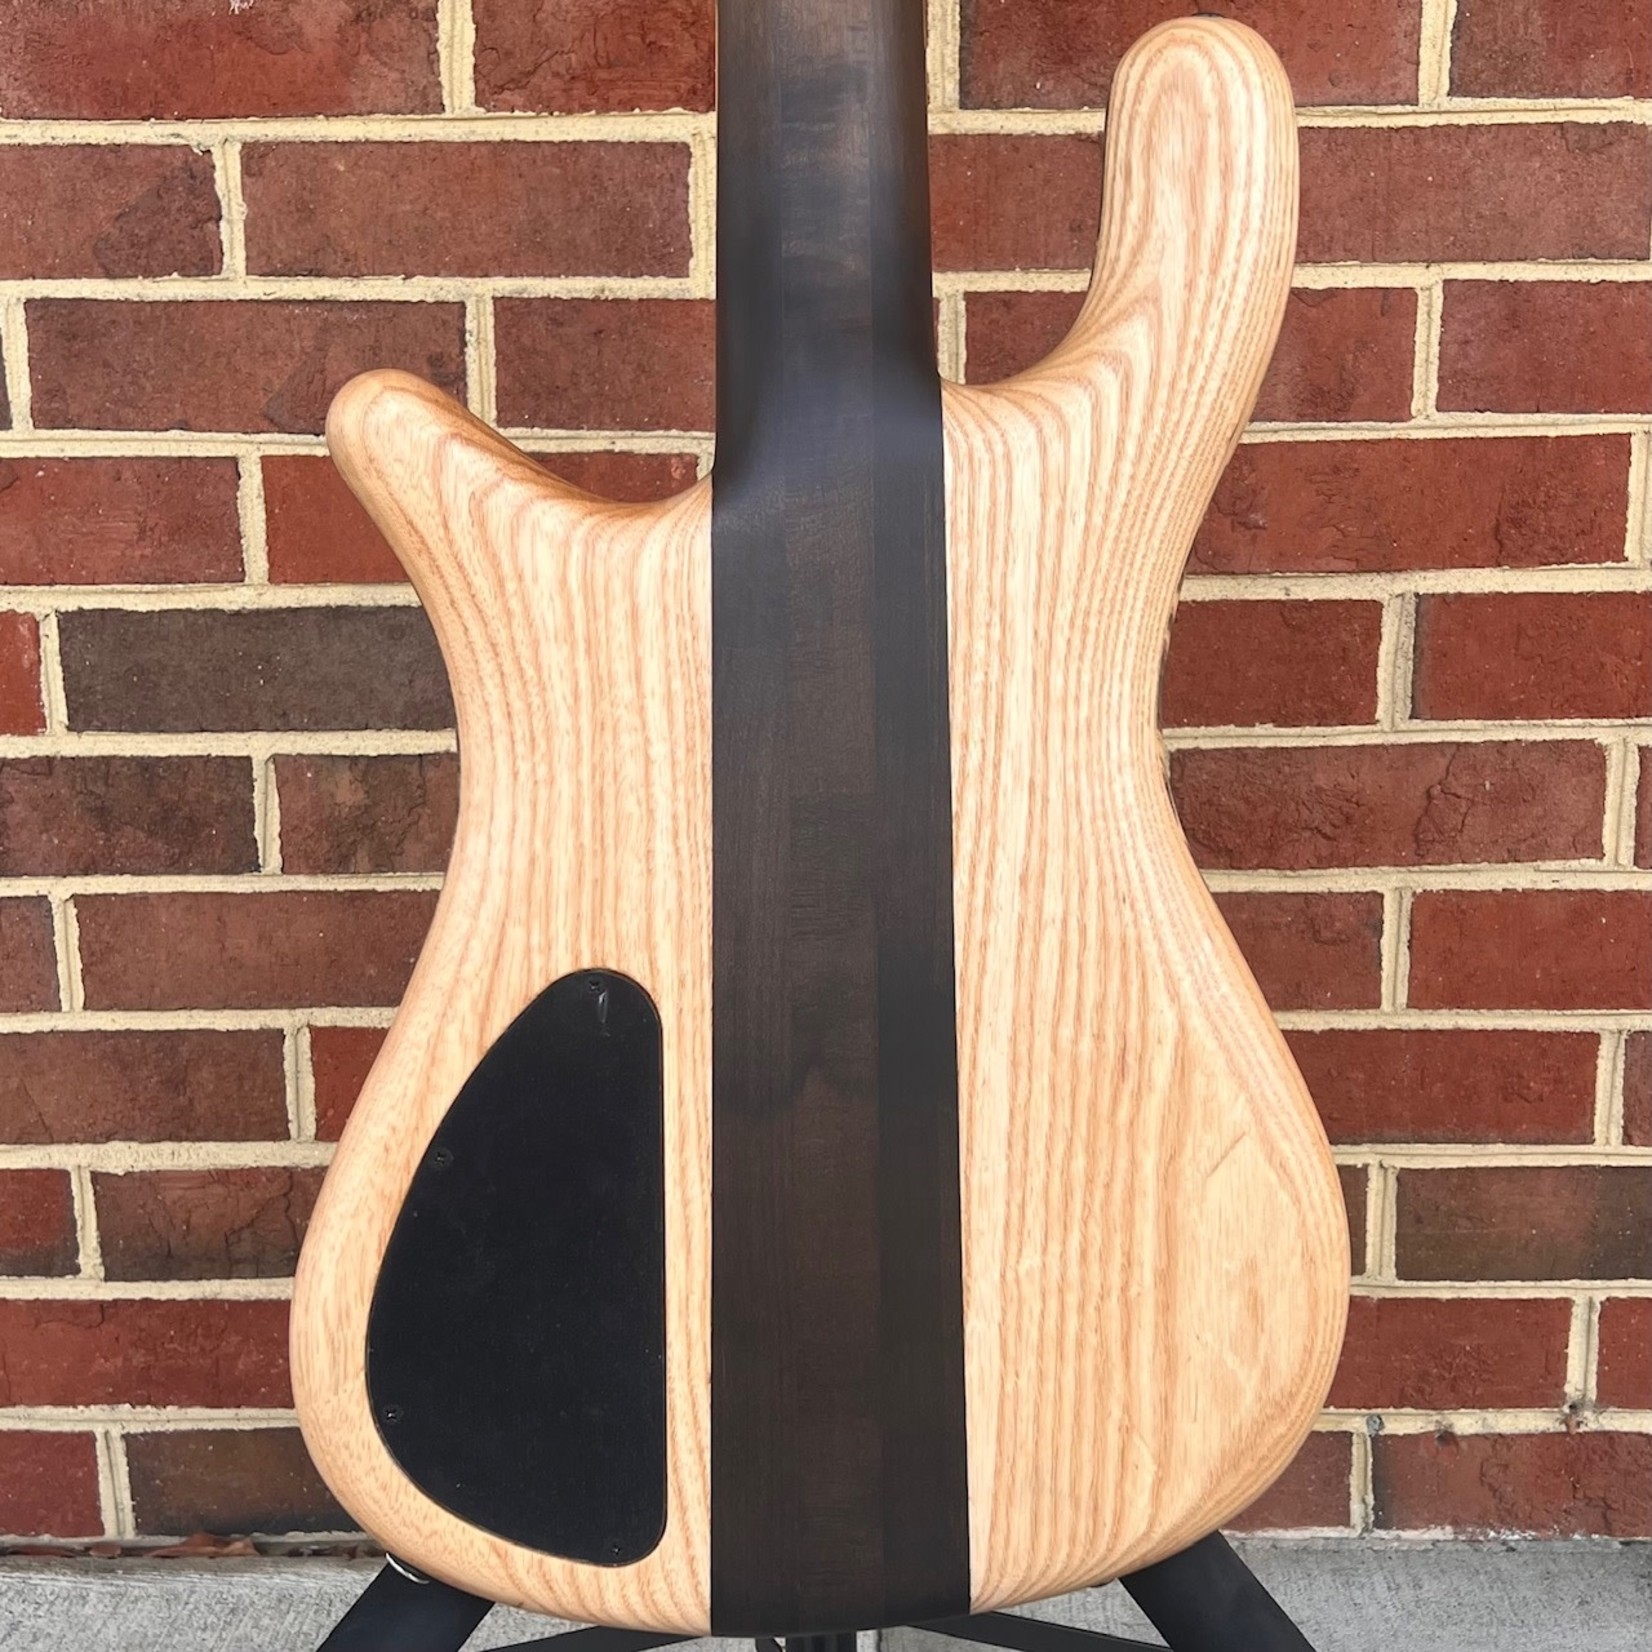 Spector Spector USA NS-5XL, Buckeye Burl Top, Swamp Ash Body - Weight Relieved, Roasted Maple Neck with Charcoal Stain, Pale Moon Ebony Fretboard, Matching Headstock, Pale Moon Ebony Logo and Truss Rod Cover, EMG 40DCX, Spector HAZ 18-volt, TSA Case